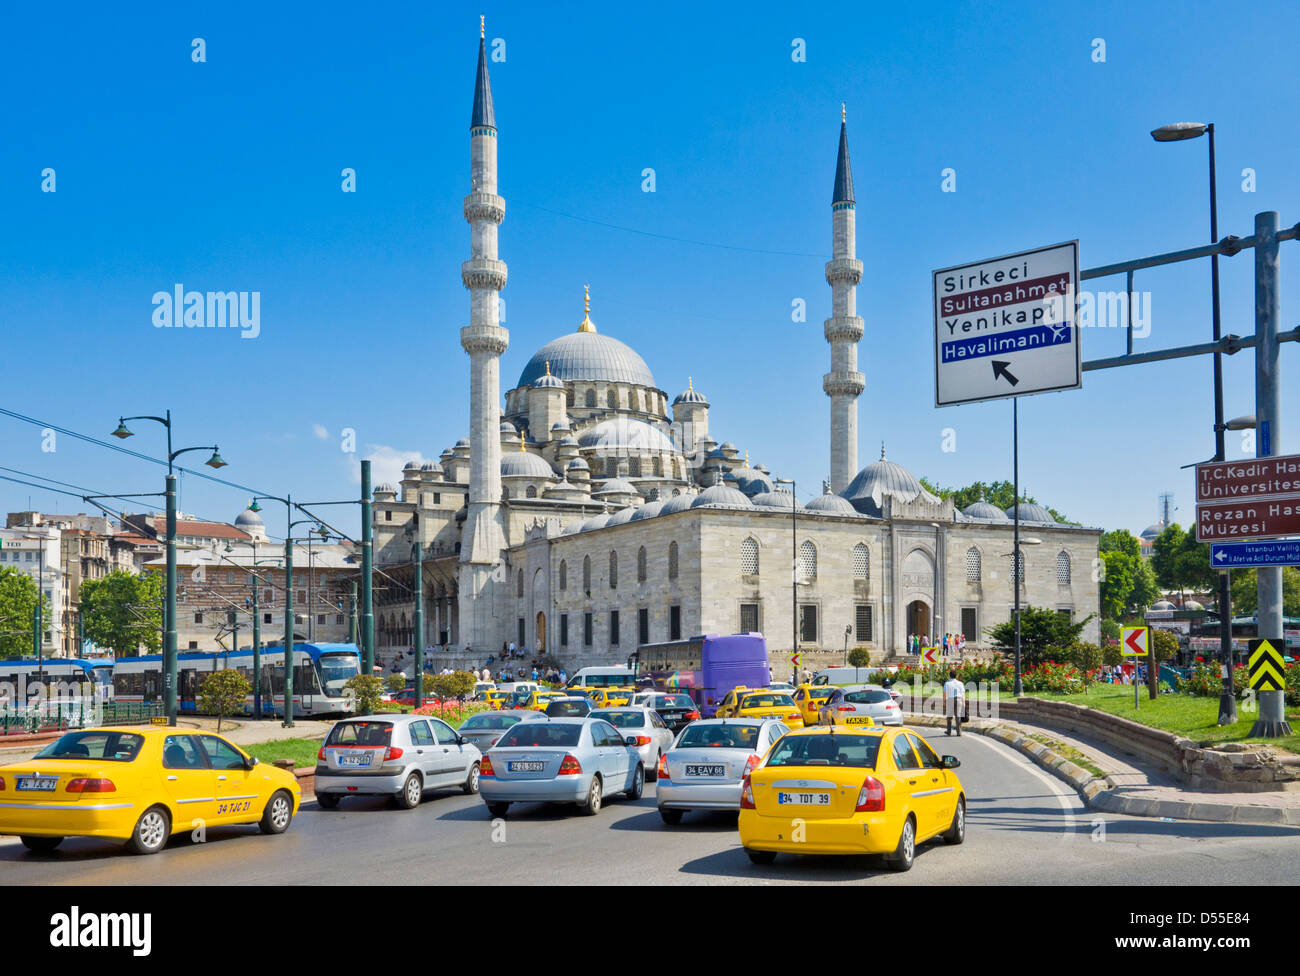 Busy traffic, yellow taxis and trams, in front of the Yeni Cami (New Mosque), Eminonu, Istanbul, Turkey Stock Photo